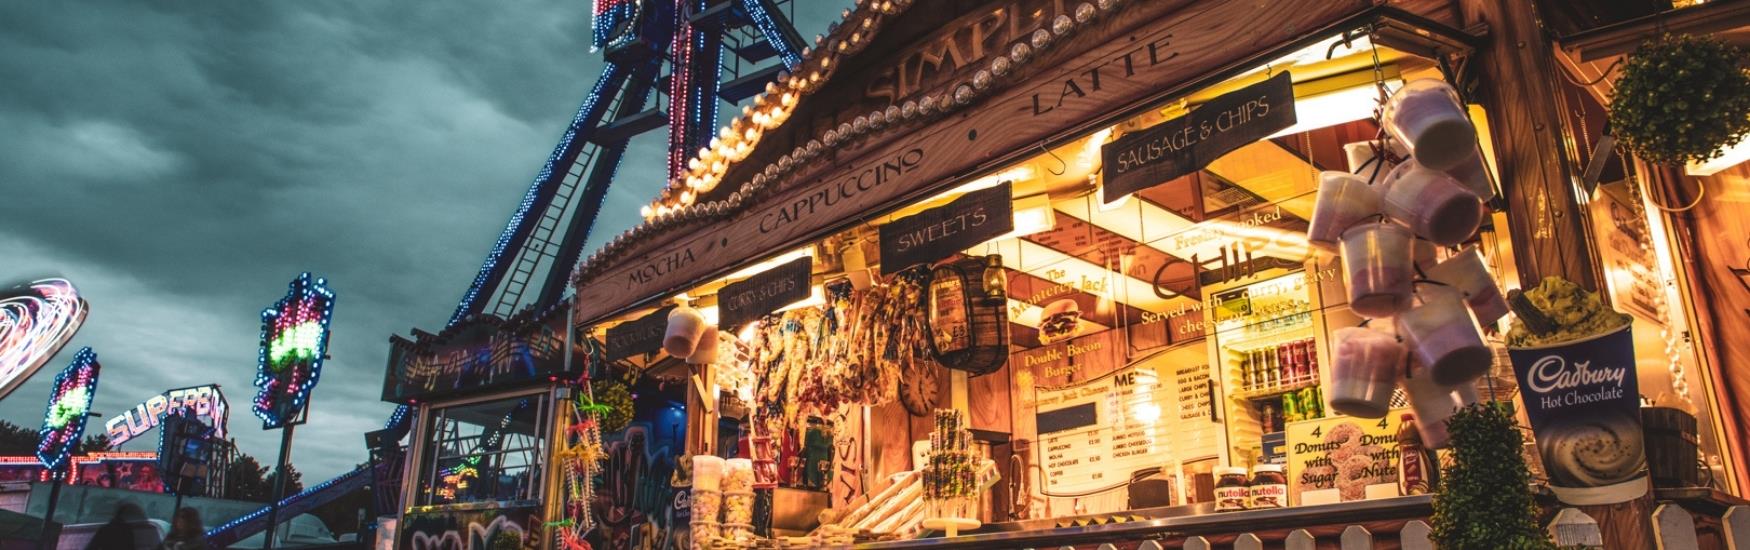 cosy looking fairground foodstall illuminates the night with a warm glow